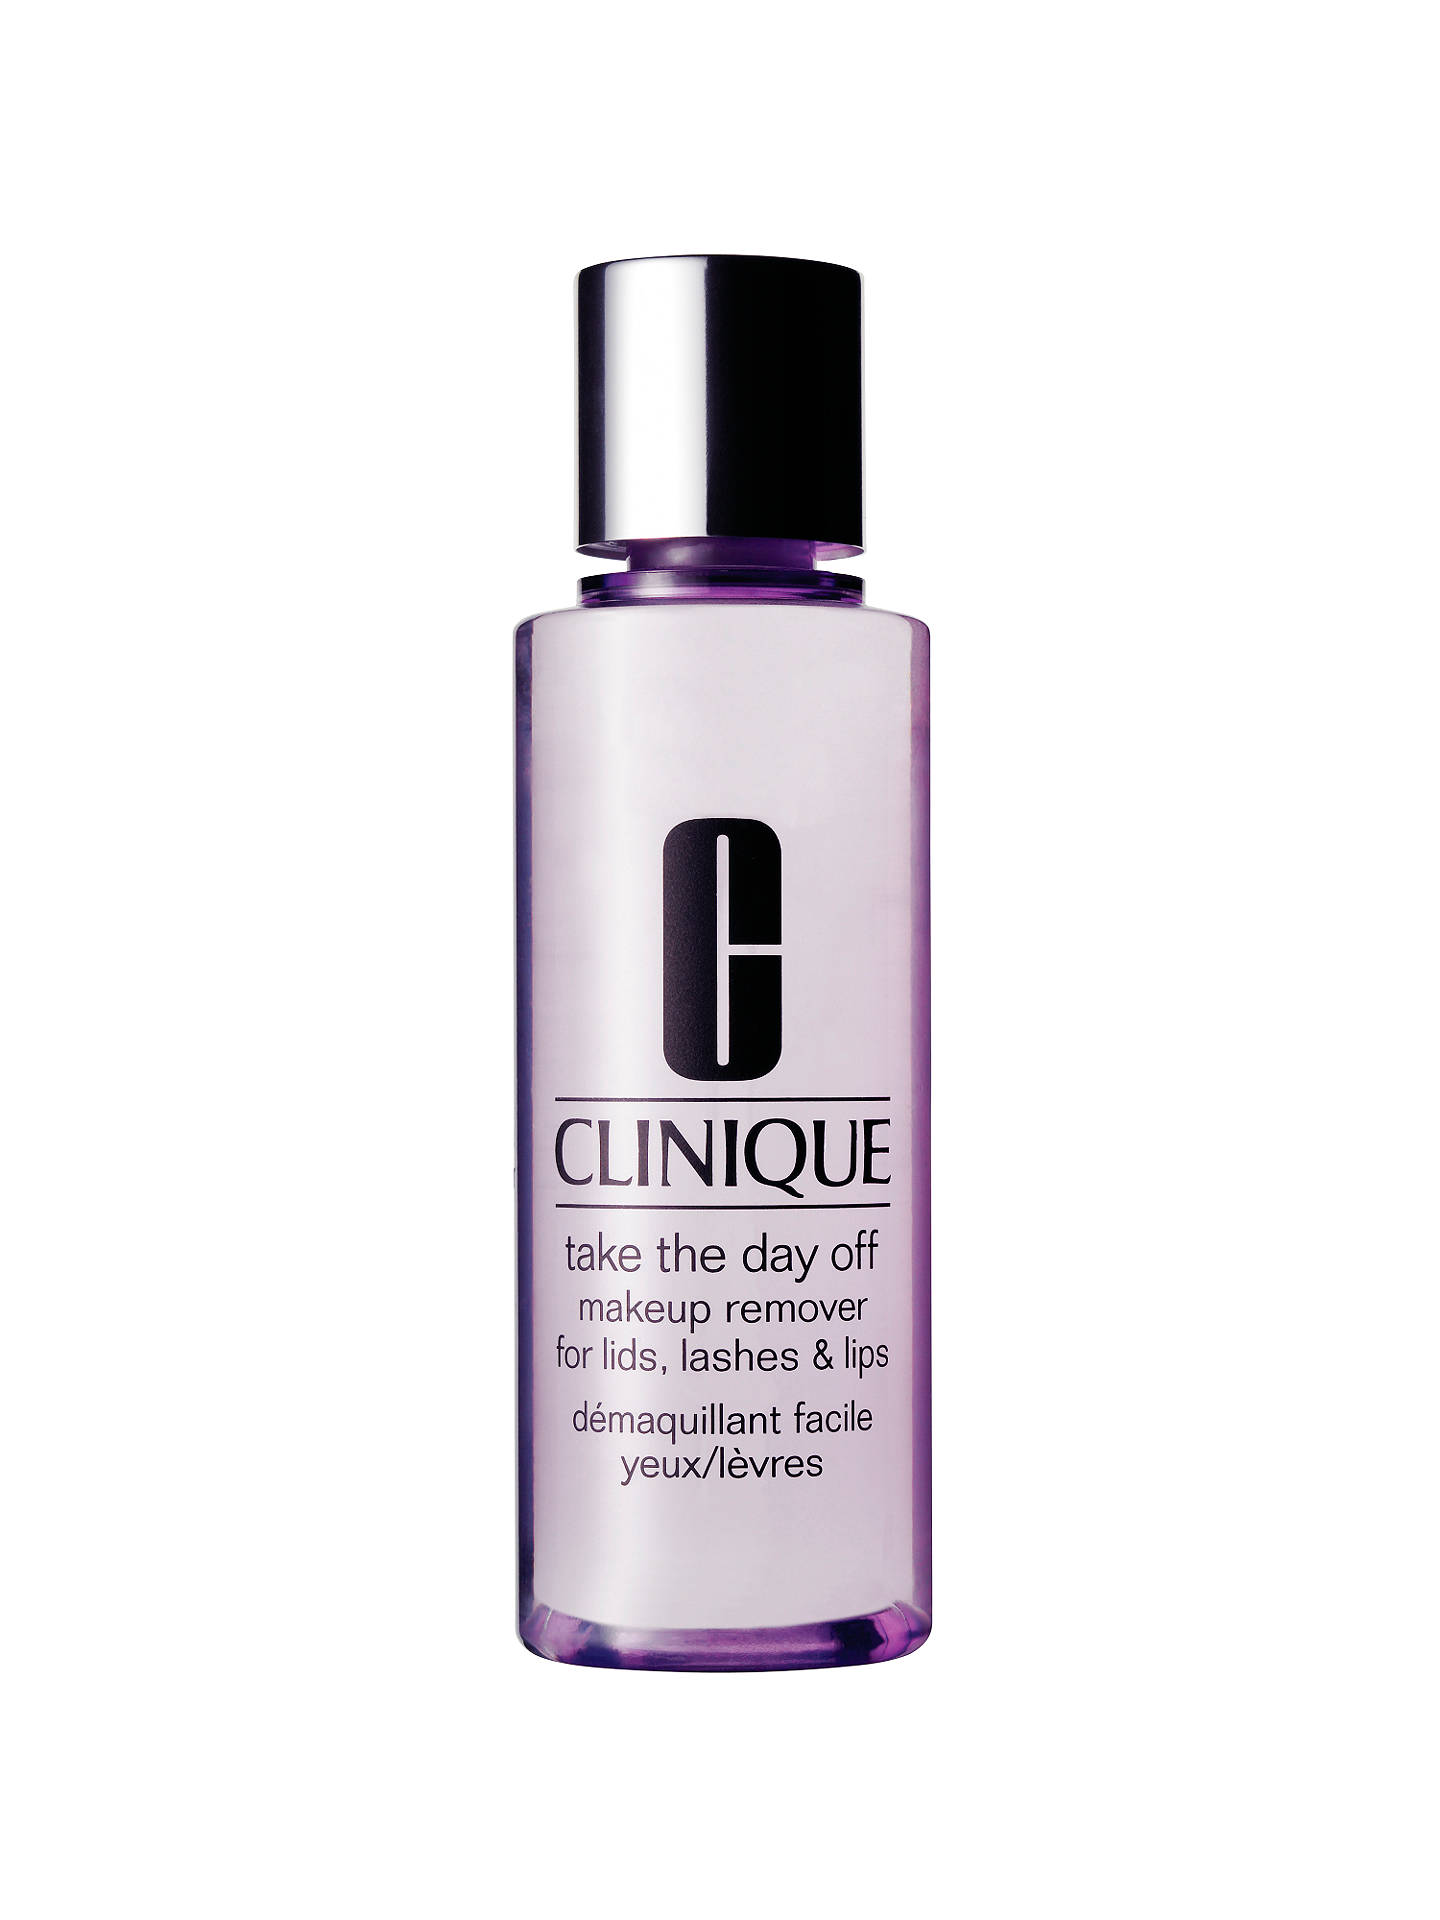 Clinique Take The Day Off Makeup Remover for Lids, Lashes & Lips Product Image